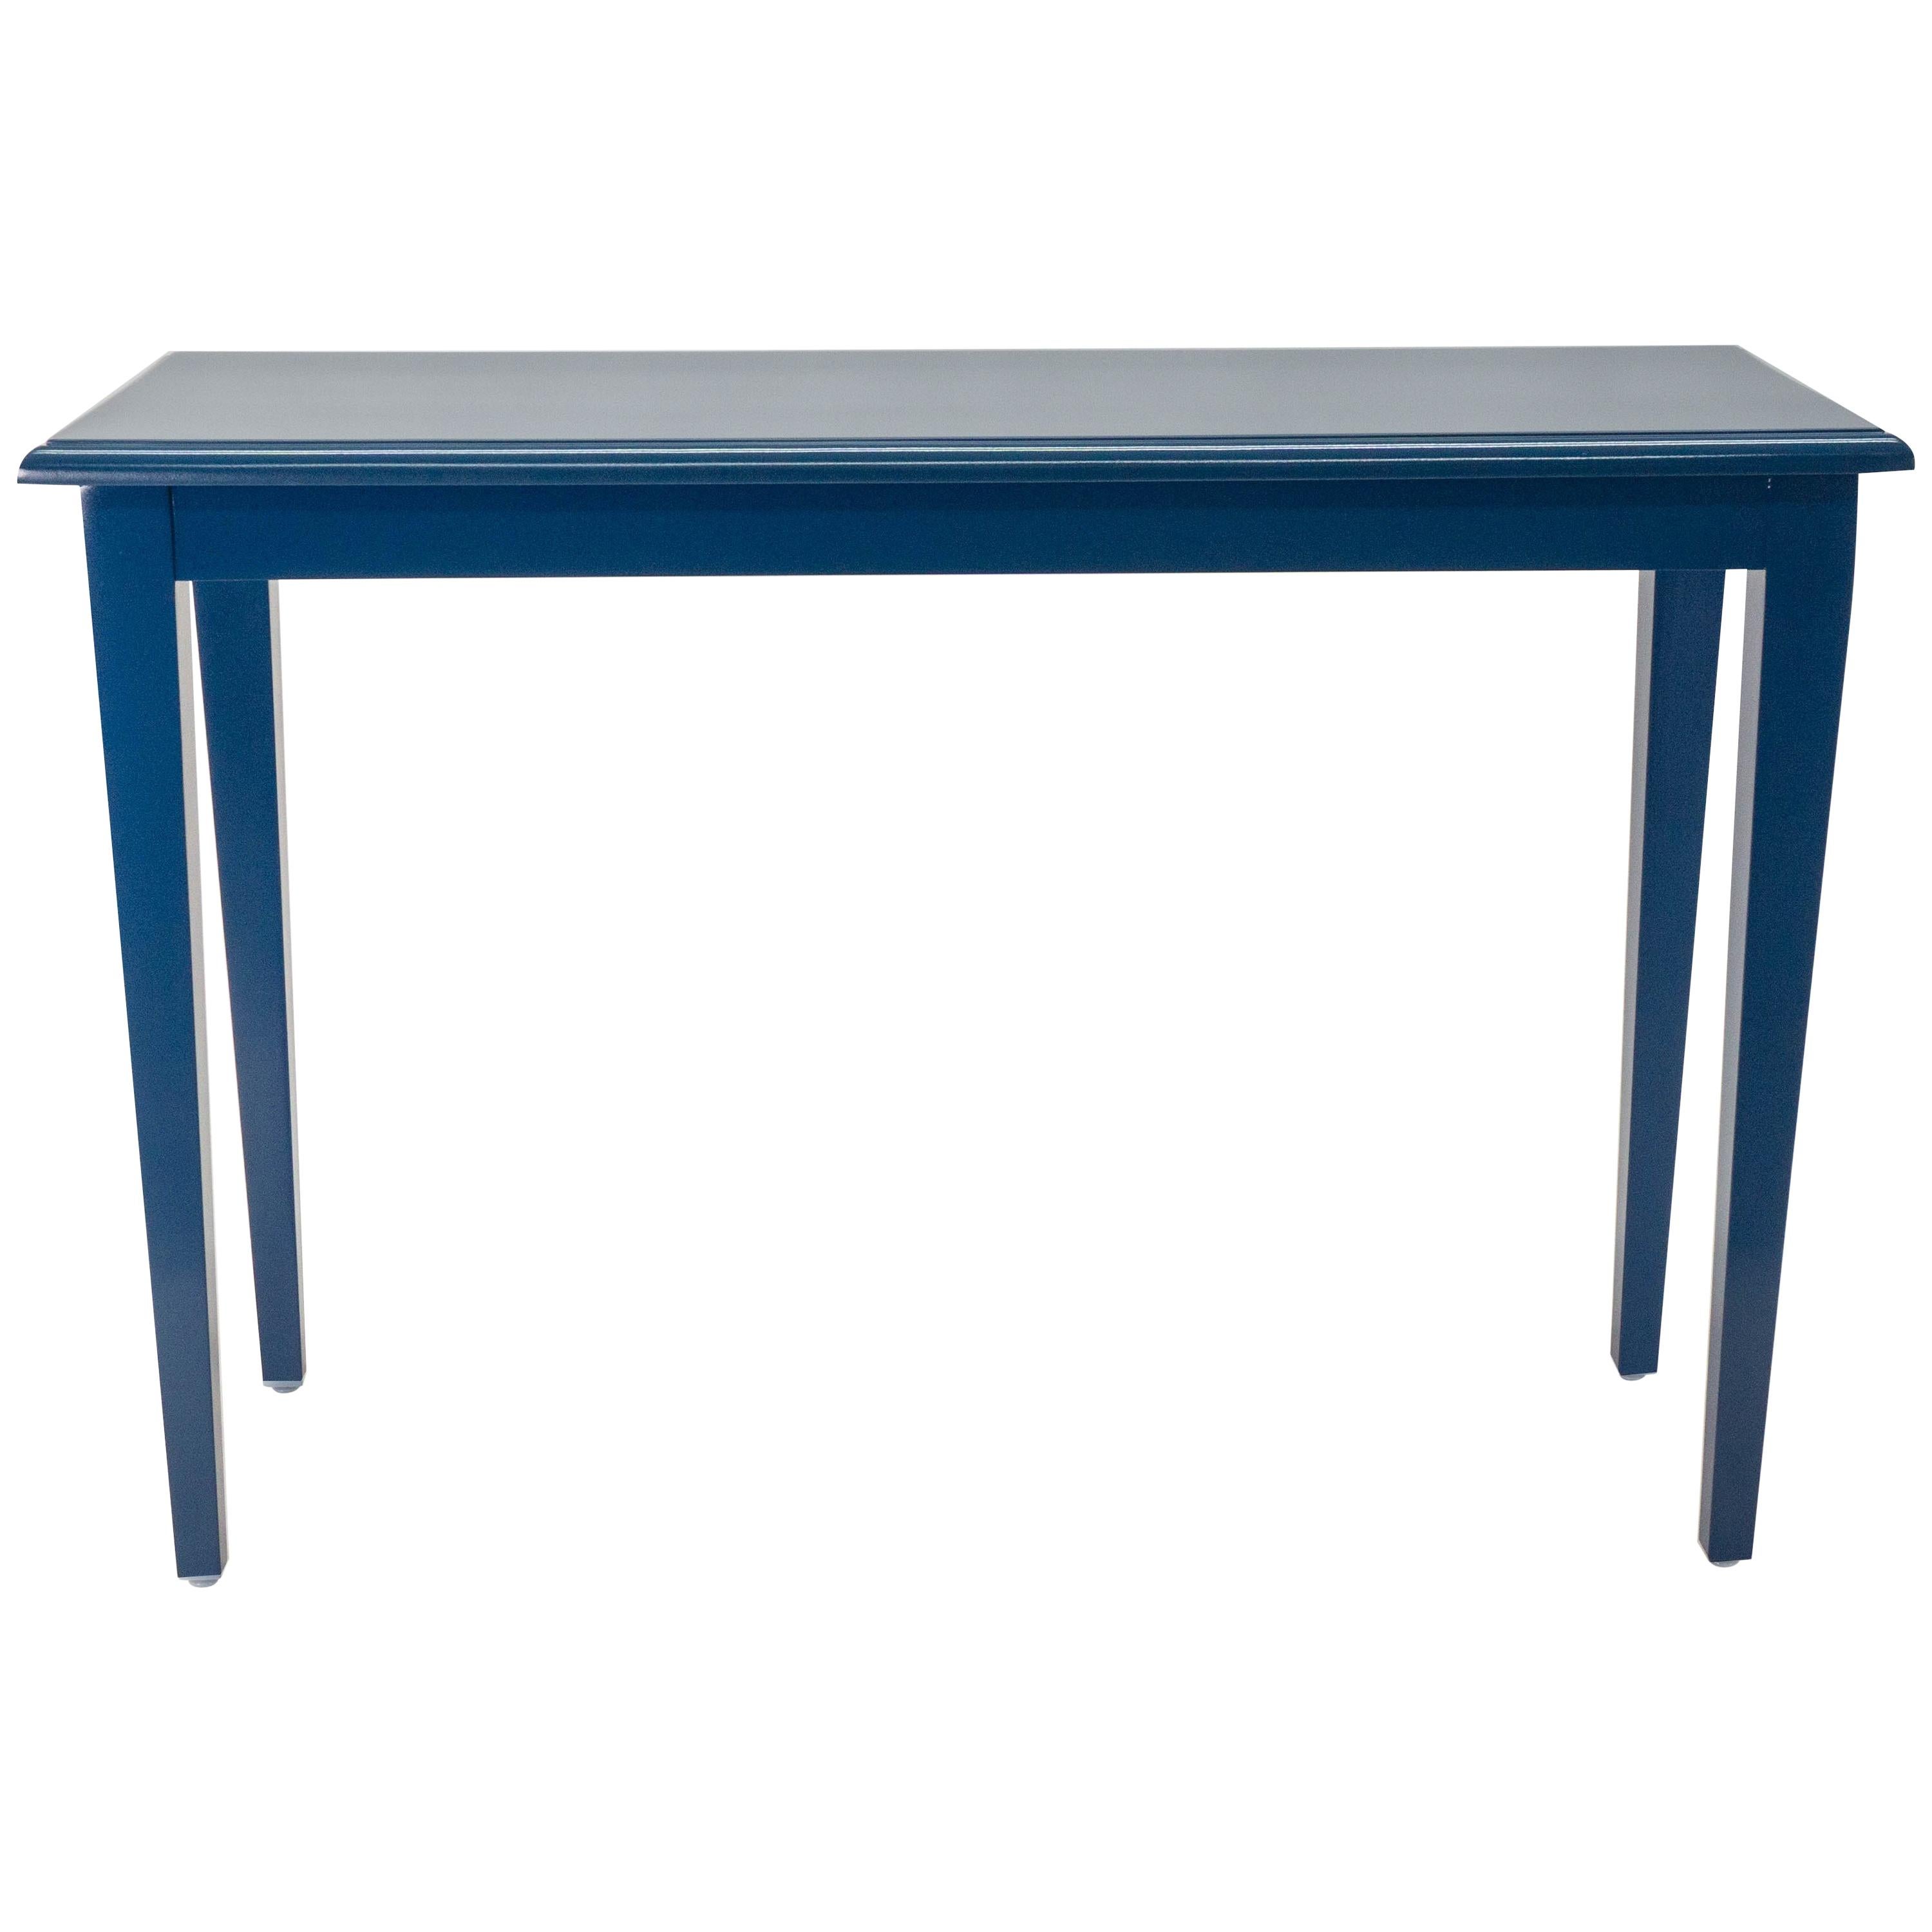 Traditional Console Table in Blue Lacquer